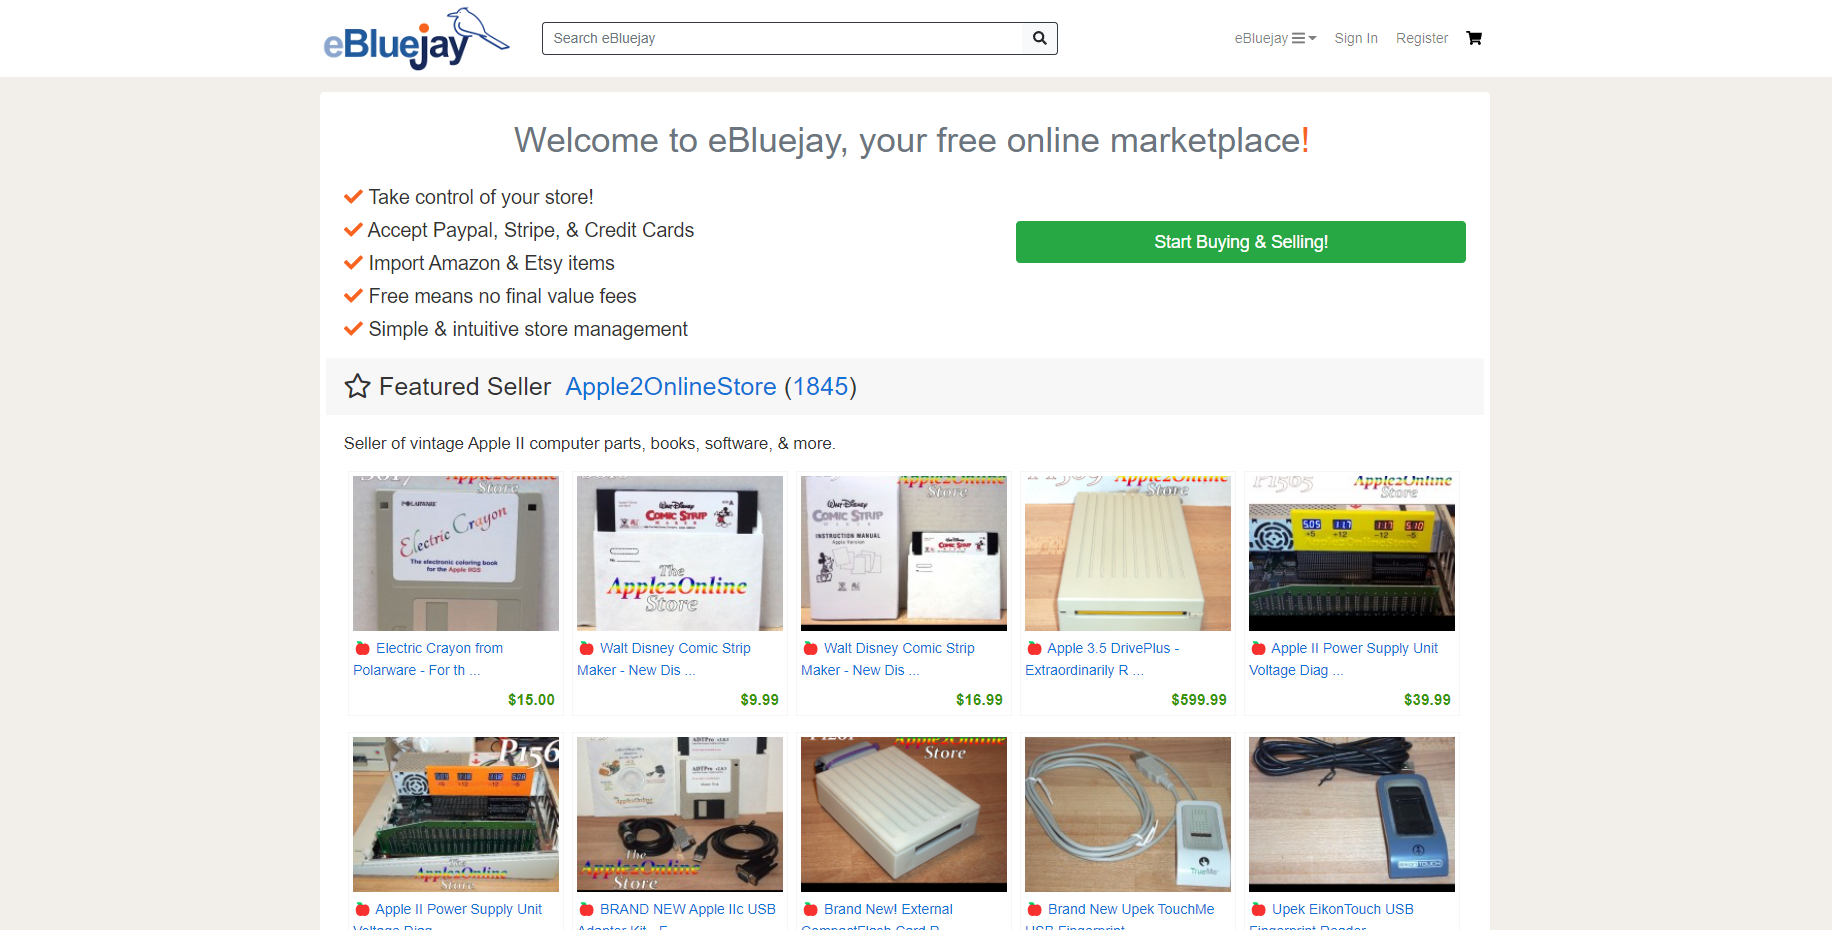 How to get started selling on eBluejay